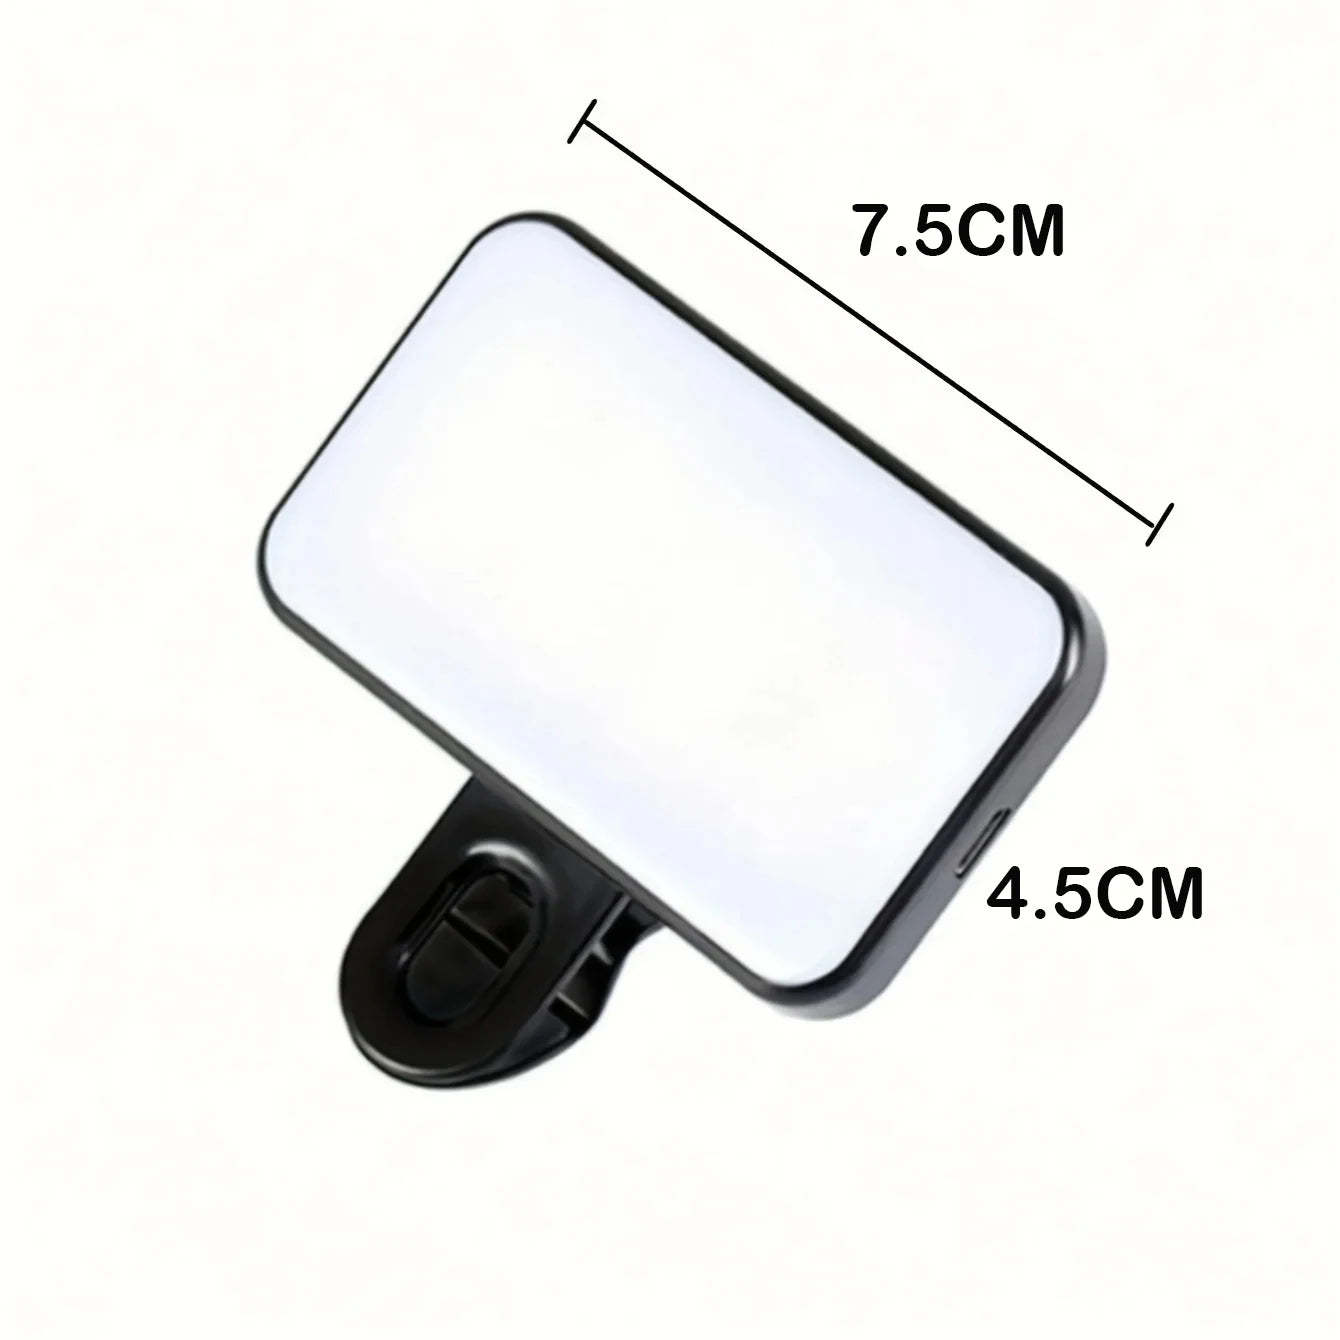 Portable Mini Selfie Fill Light Rechargeable 3 Modes Adjustable Brightness Clip On For Mobile Phone Computer Fill Light